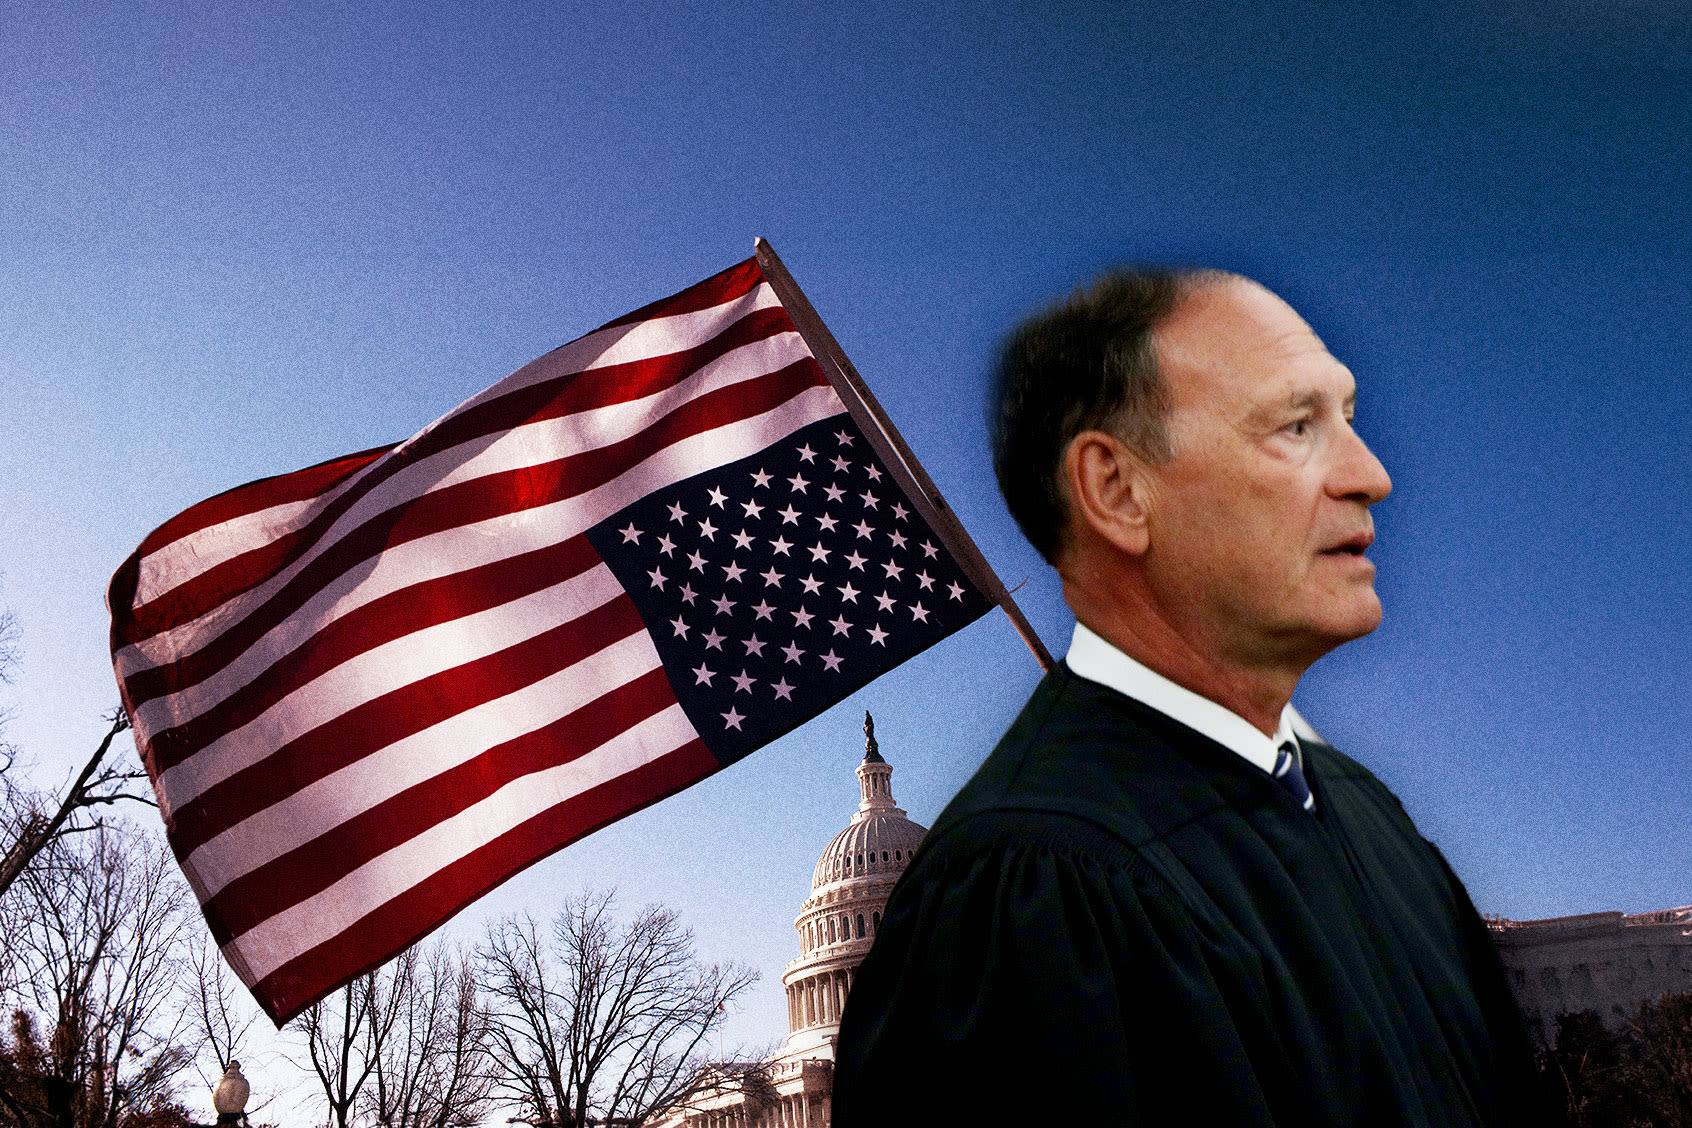 Samuel Alito's snide denial of his Jan. 6 flag is just as ugly as flying it in the first place